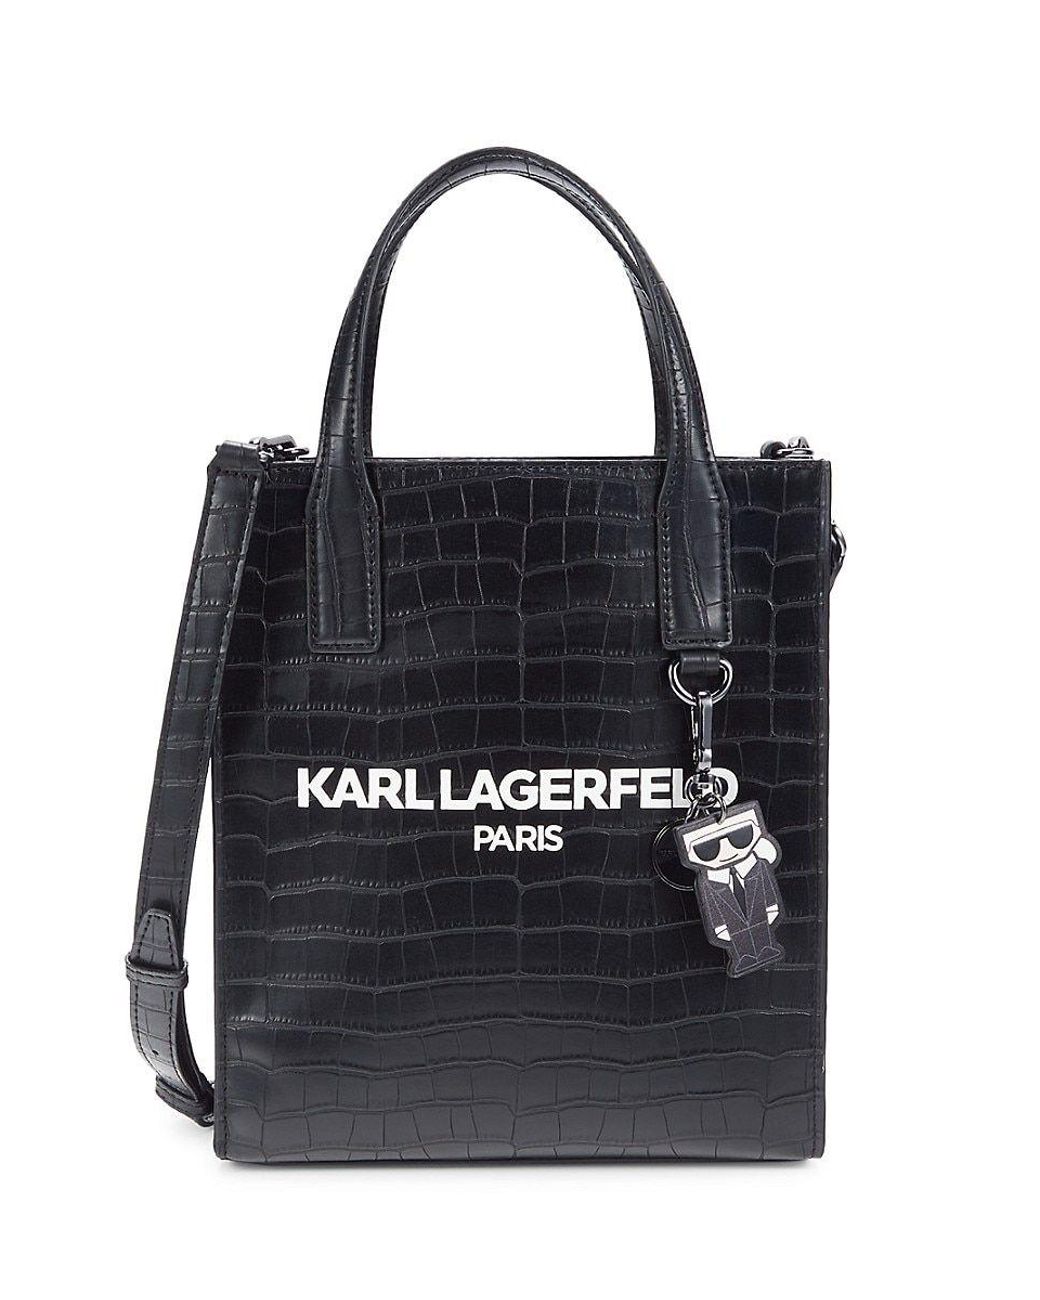 Karl Lagerfeld Nouveau Croc Embossed Leather Tote in Black | Lyst